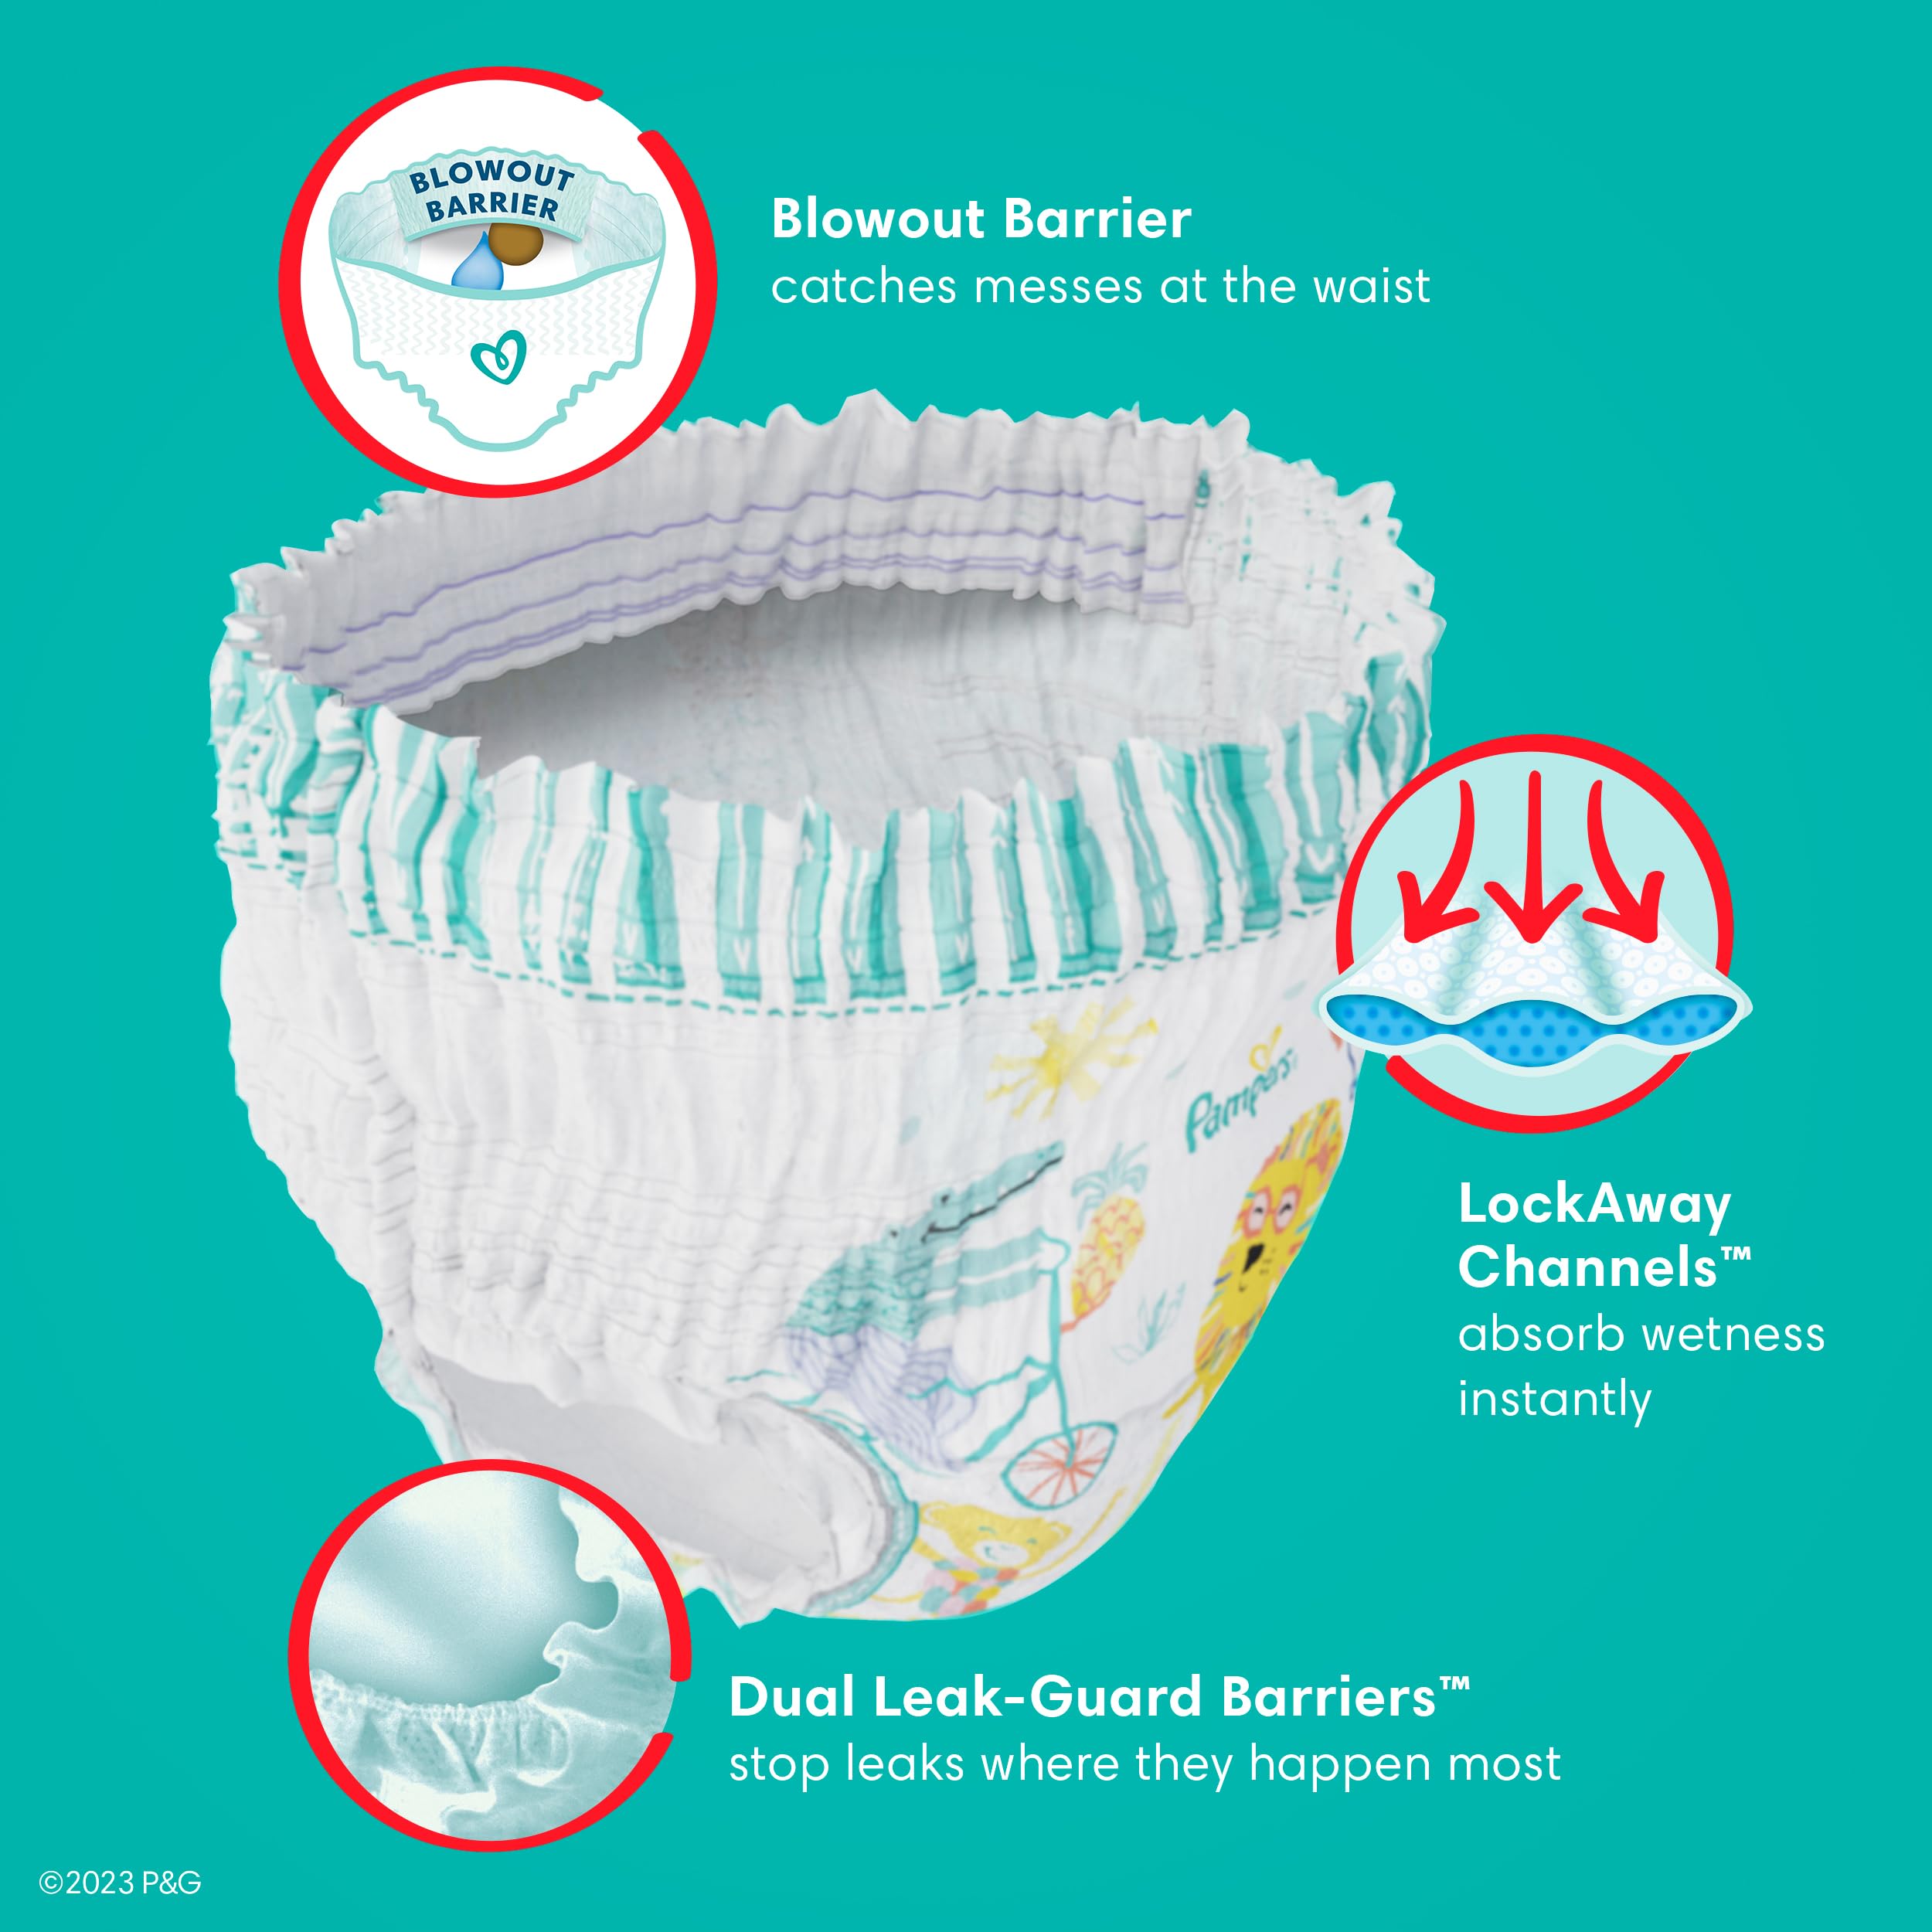 Pampers Cruisers 360 Diapers - Size 7, 70 Count, Pull-On Disposable Baby Diapers, Gap-Free Fit